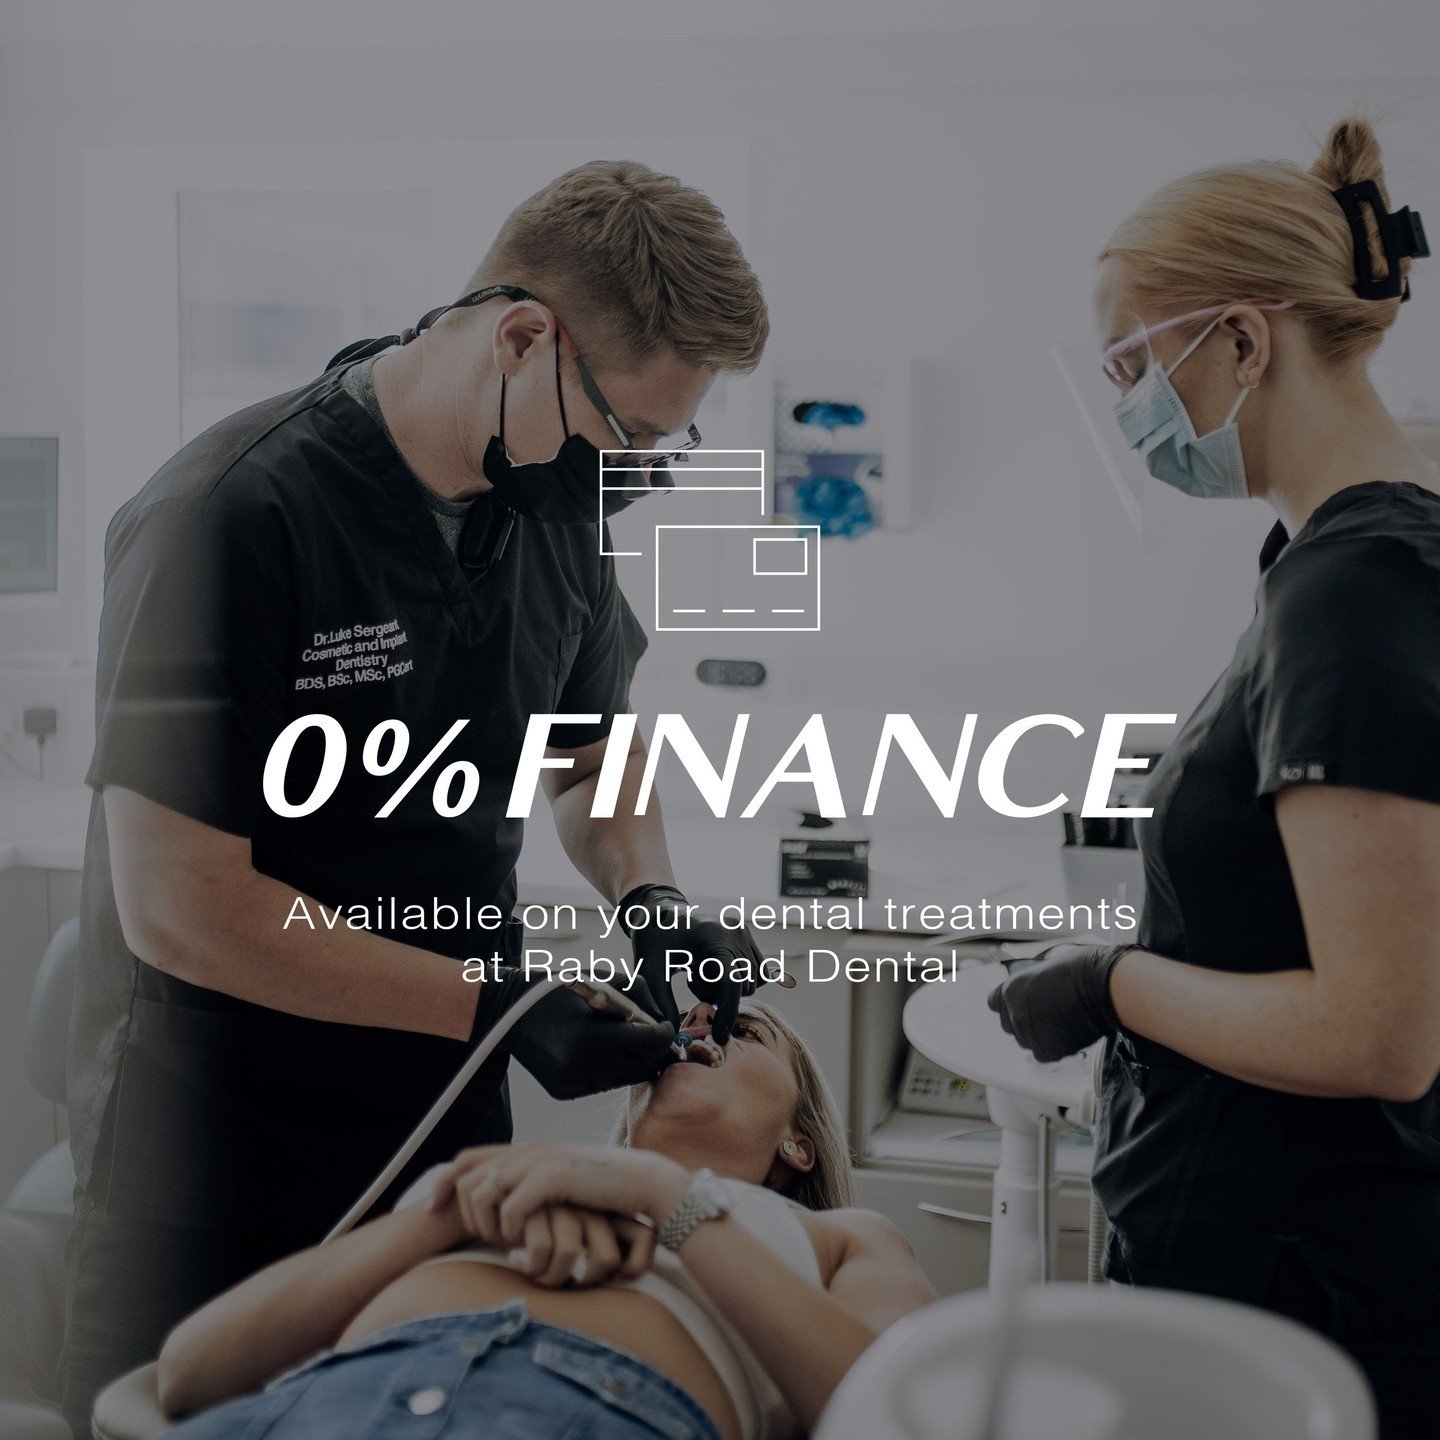 Take advantage of our flexible payment plans and make your dental care more affordable. Book your appointment today and experience exceptional dental care without breaking the bank! 🤍

#composite #dentistry #dentist #dental #smile #teeth #veneers